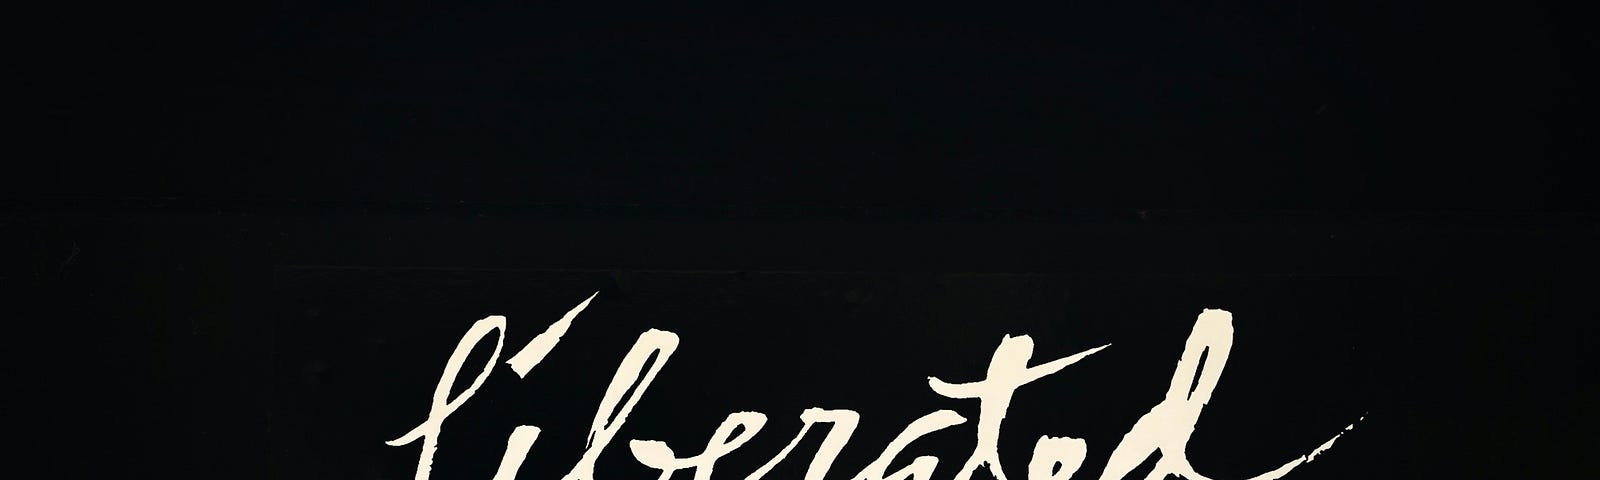 LIberated in cursive on a black background.